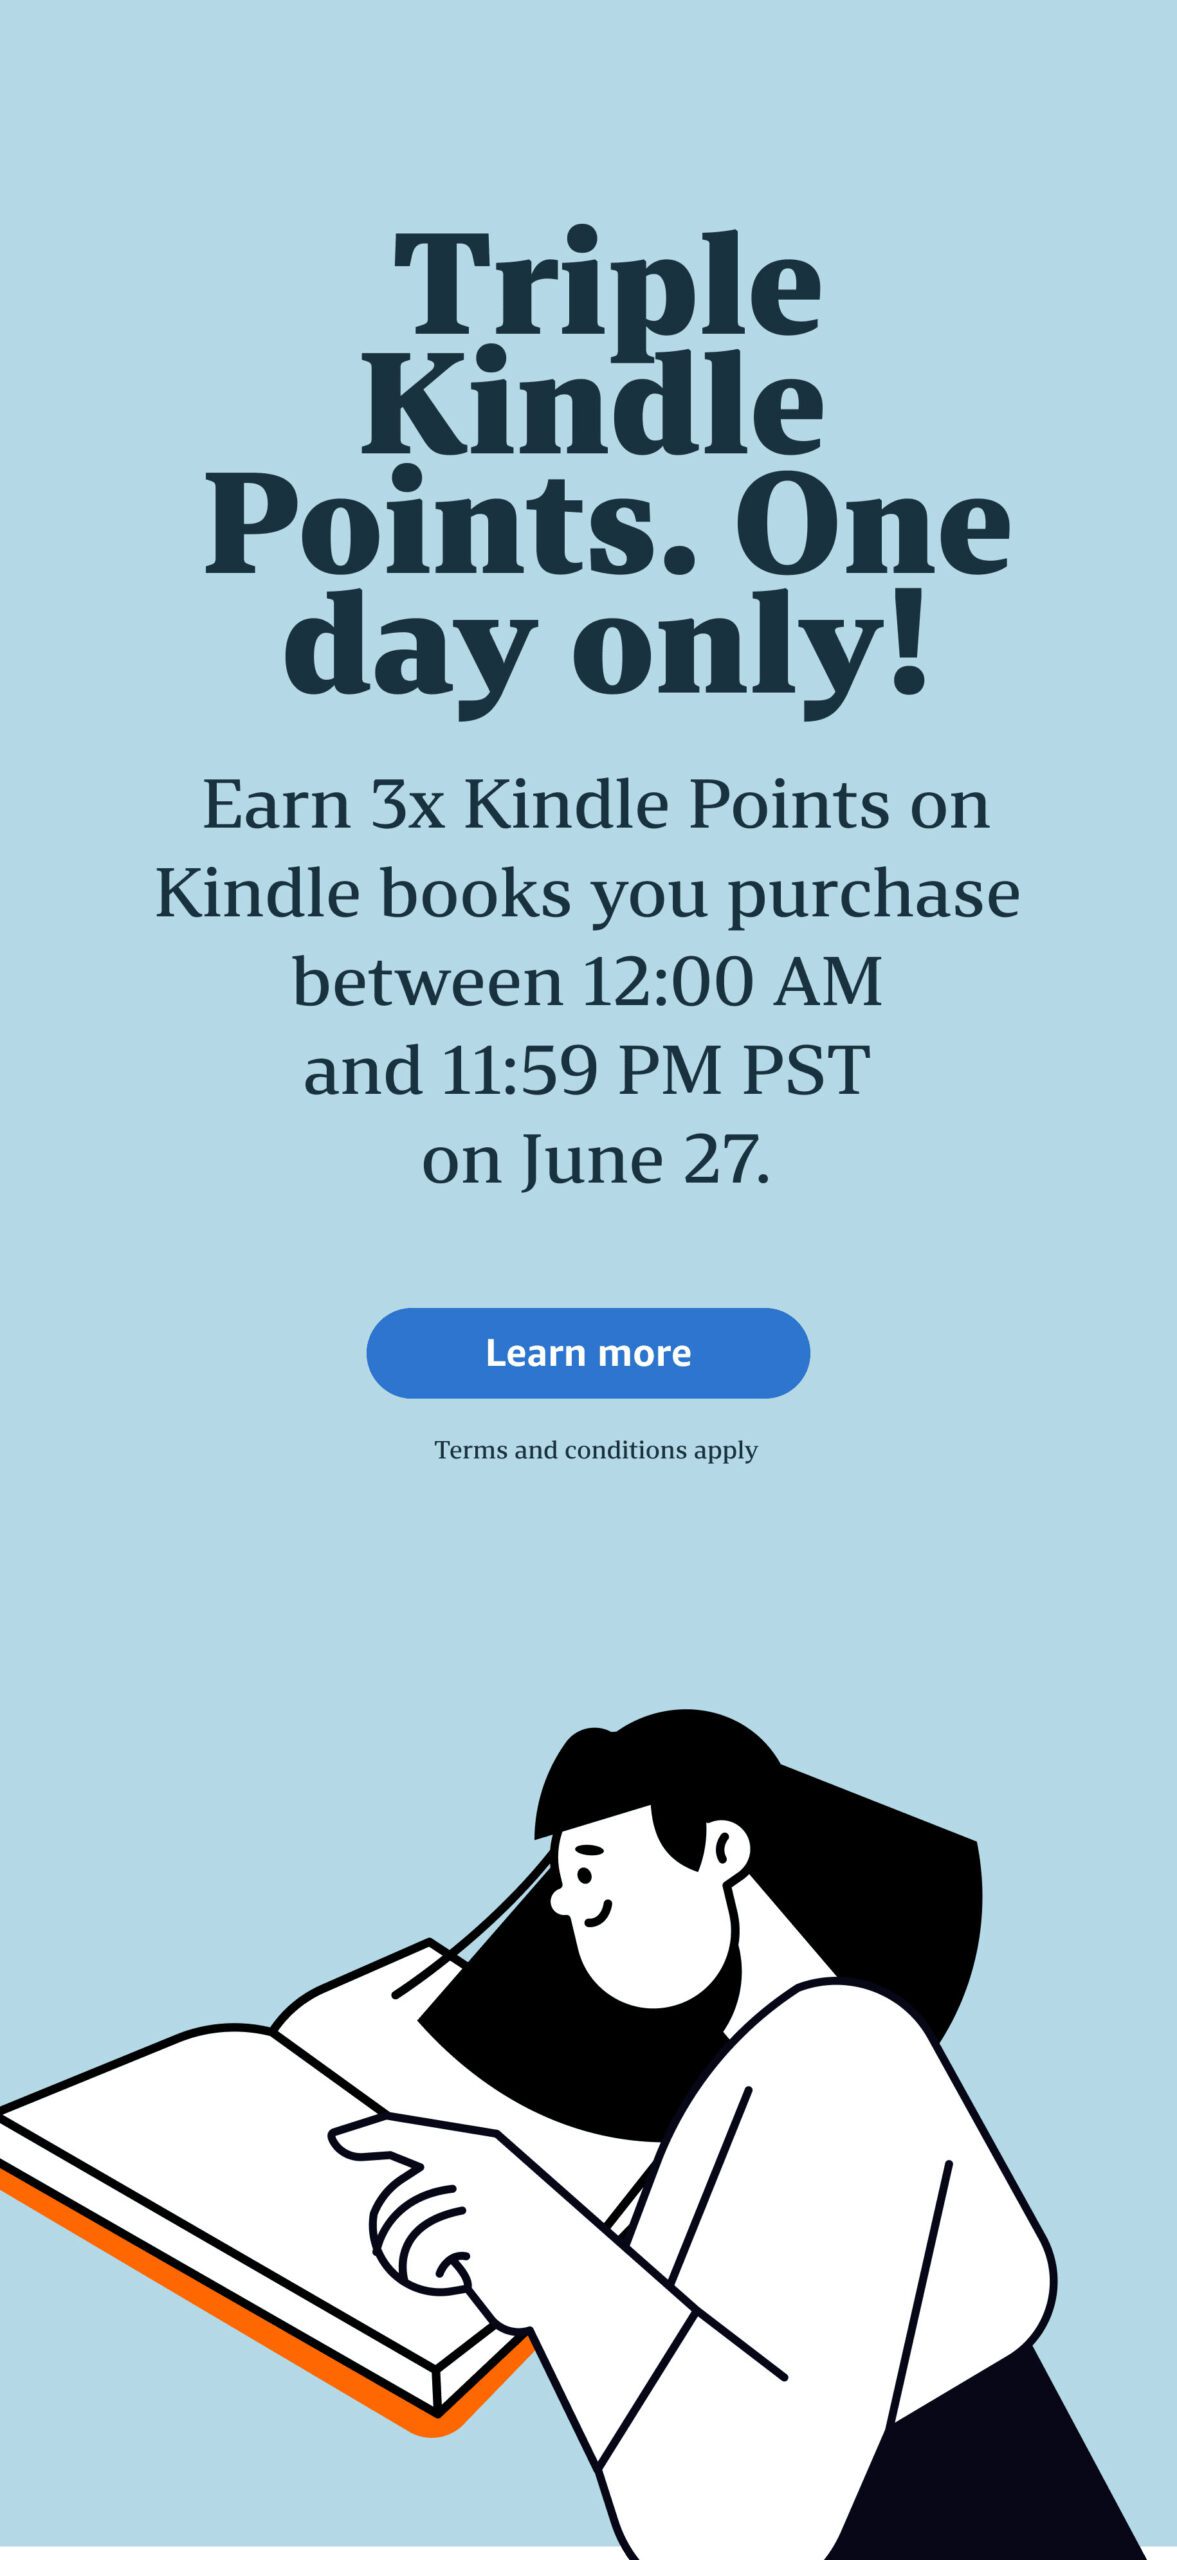 TODAY ONLY June 27th! Get TRIPLE KINDLE REWARD POINTS when you purchase Amazon Kindle Books!